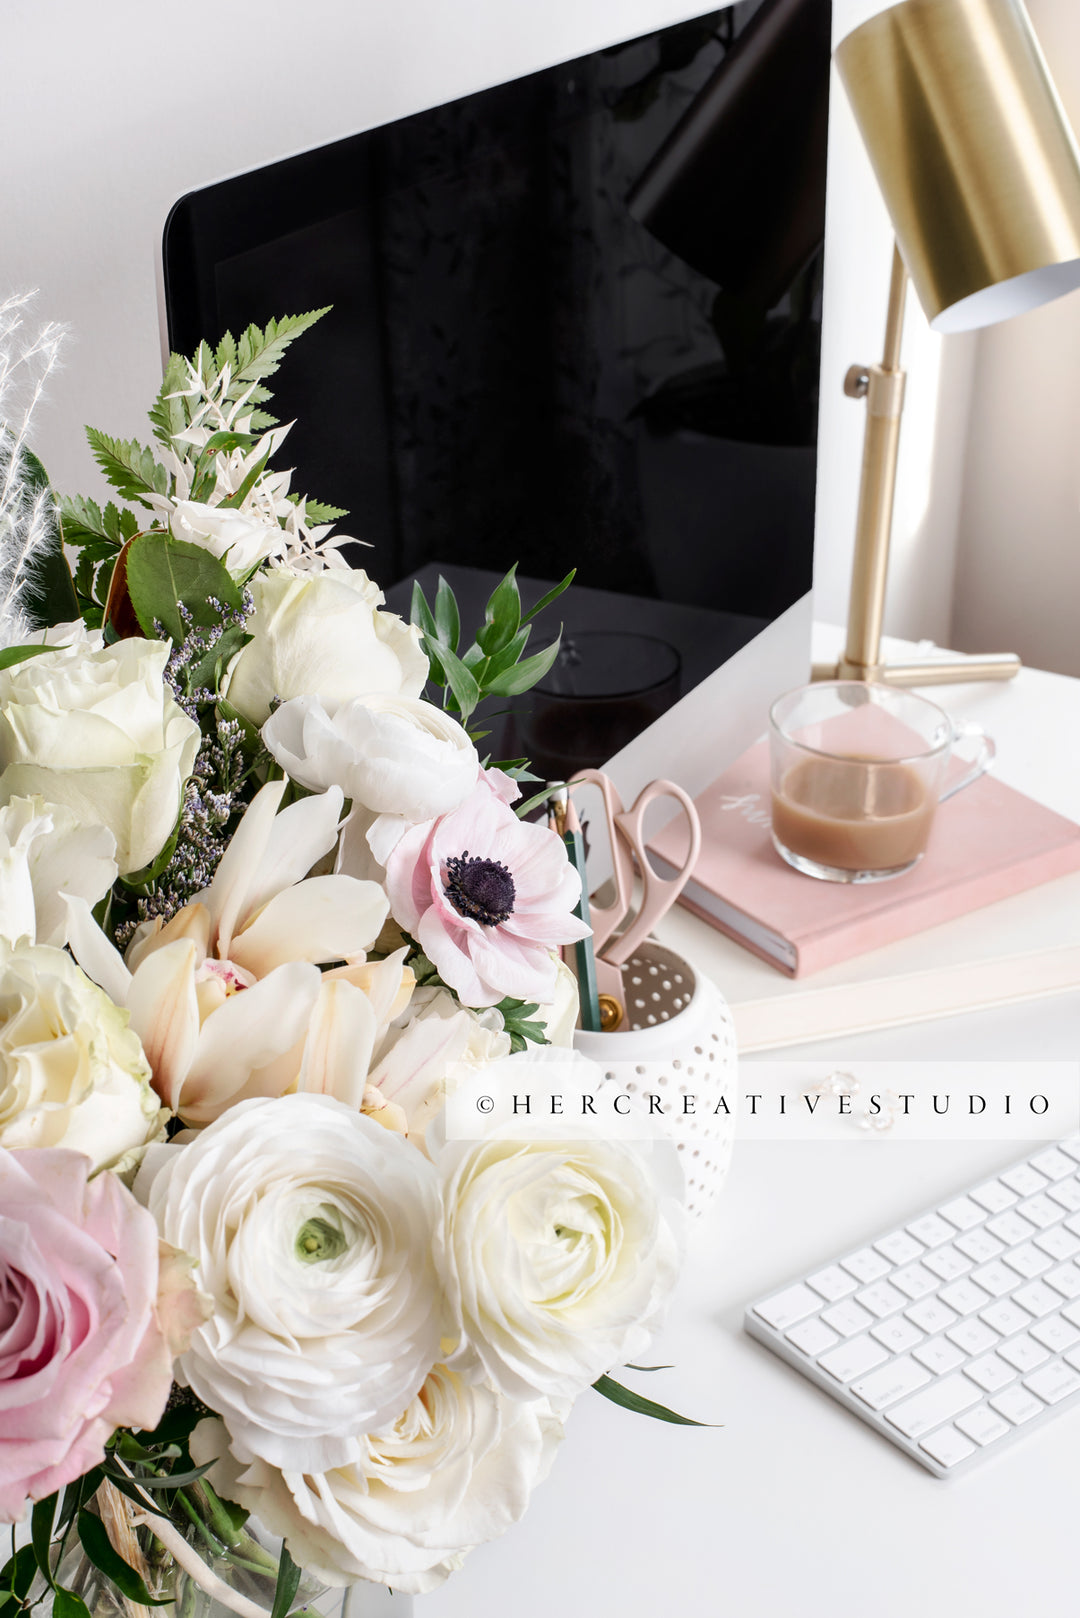 Flowers & Gold Lamp on Pretty Workspace, Styled Stock Image